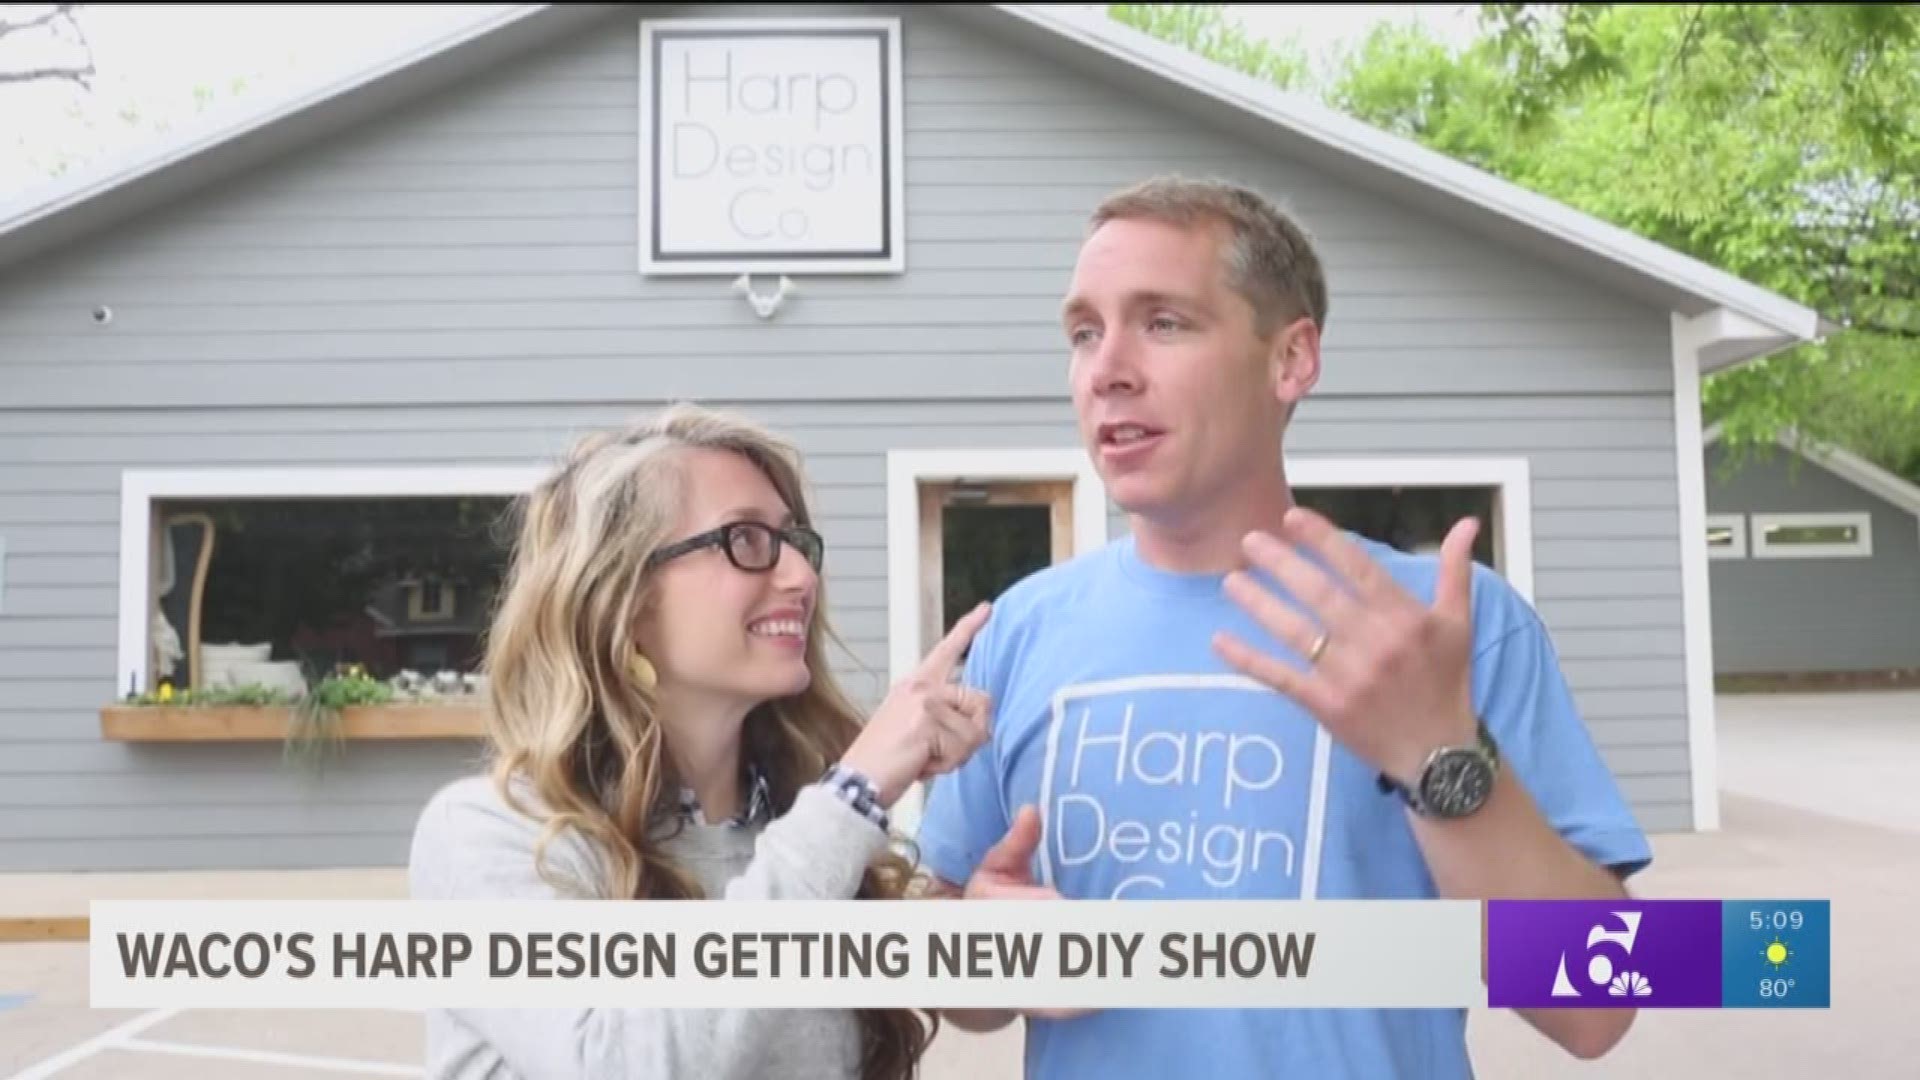 Waco craftspeople Clint and Kelly Harp, whose Harp Design Company rose to fame thanks to HGTV's Fixer Upper are now getting their own TV Show.